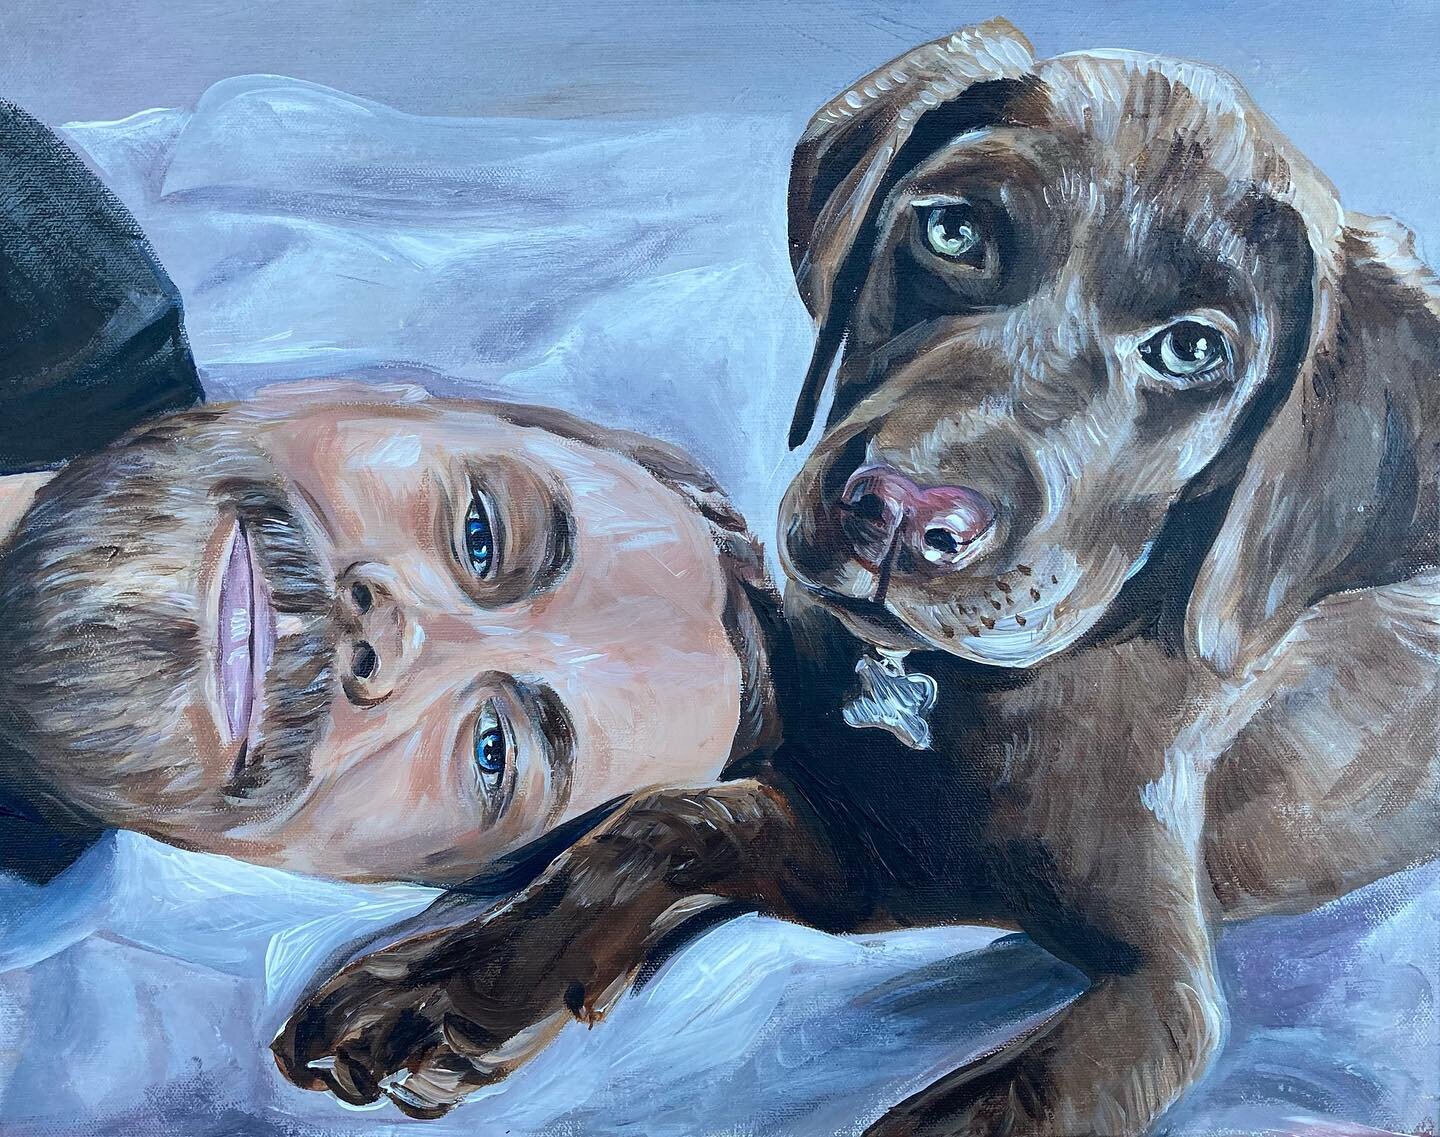 &ldquo;You can usually tell that a man is good if he has a dog who loves him.&rdquo; &ndash; W. Bruce Cameron

16x20 acrylic
#dog #dogportrait #dogpainting #mansbestfriend #pet #petportrait